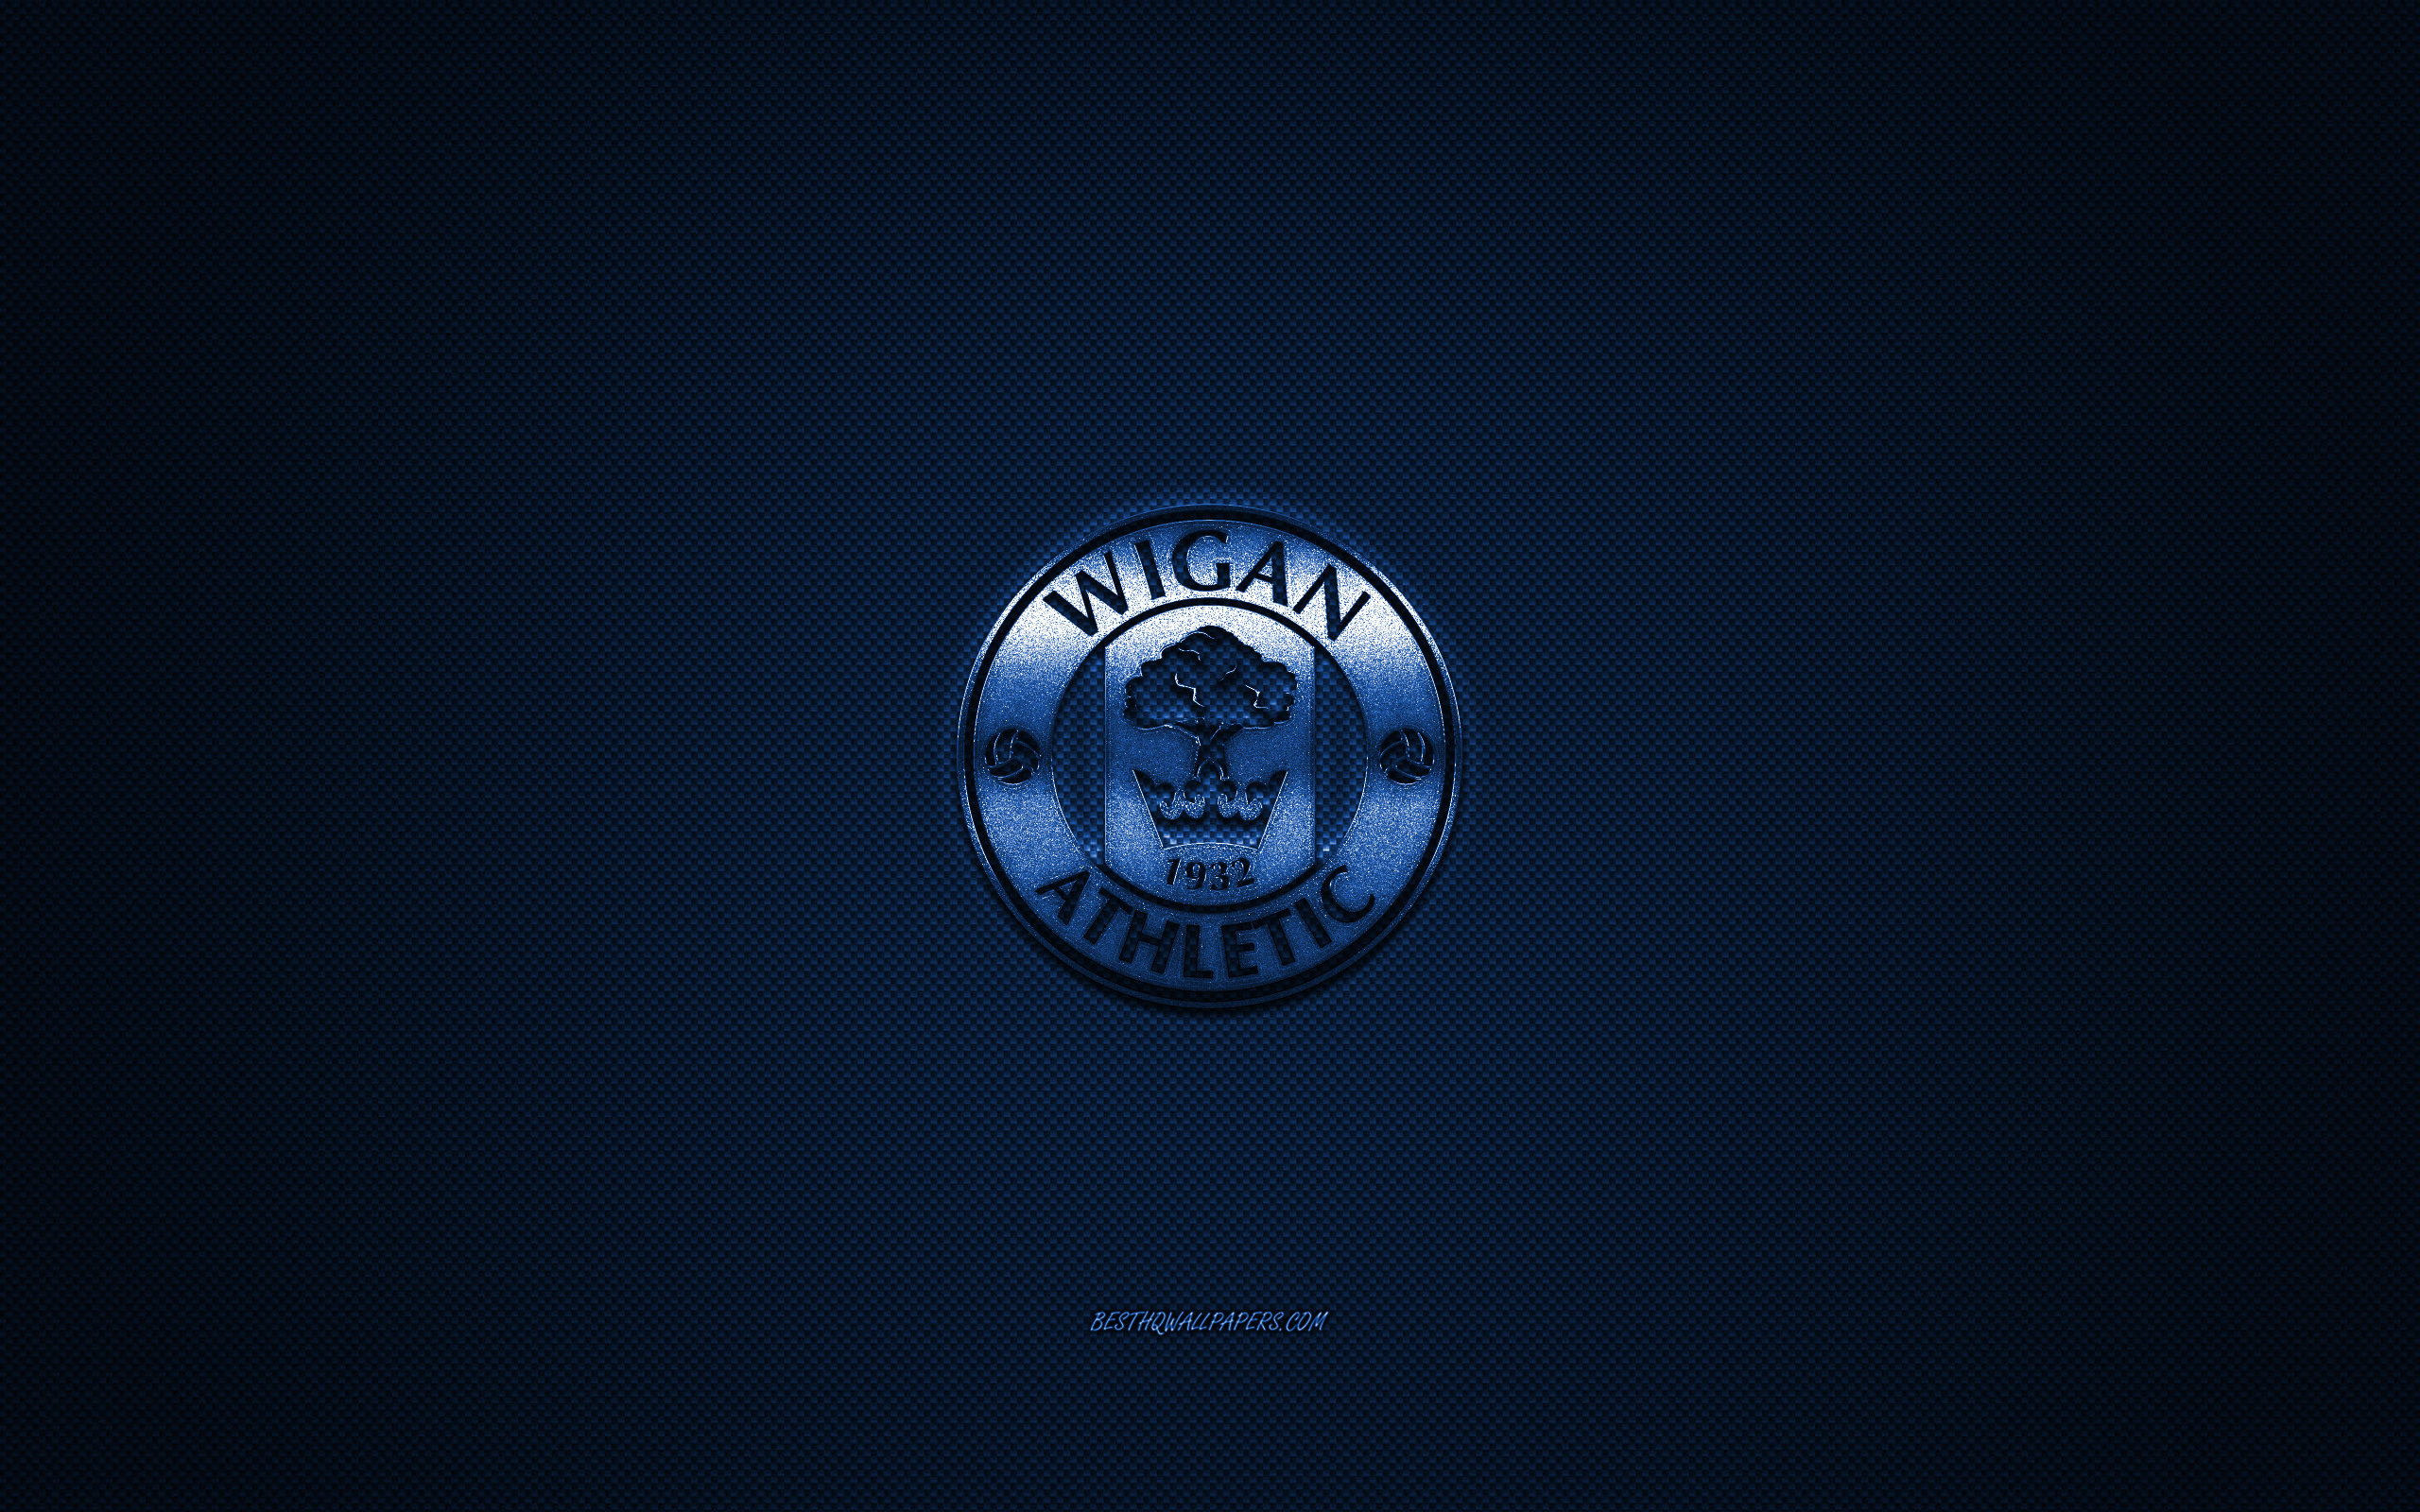 Download wallpaper Wigan Athletic FC, English football club, EFL Championship, blue logo, blue carbon fiber background, football, Wigan, England, Wigan Athletic FC logo for desktop with resolution 2560x1600. High Quality HD picture